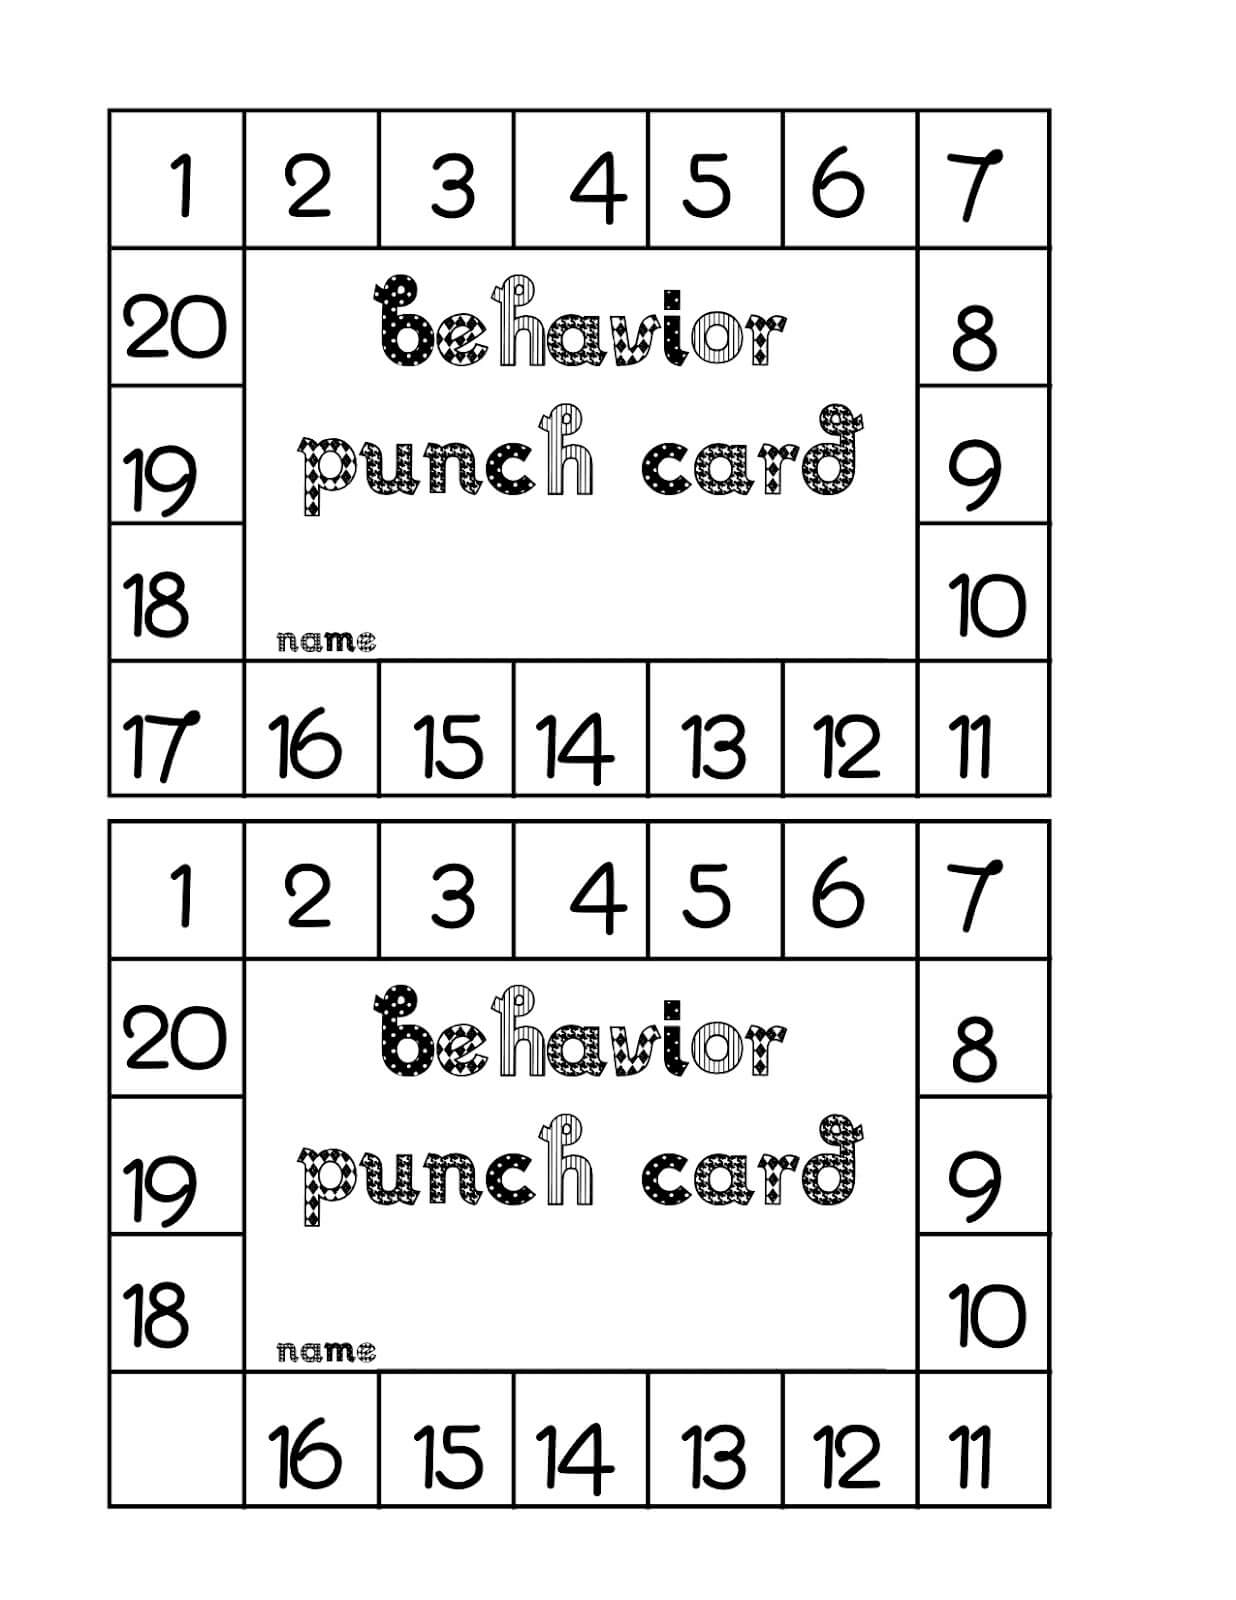 Punch Card Template Free ] - Free Printable Punch Card Intended For Free Printable Punch Card Template